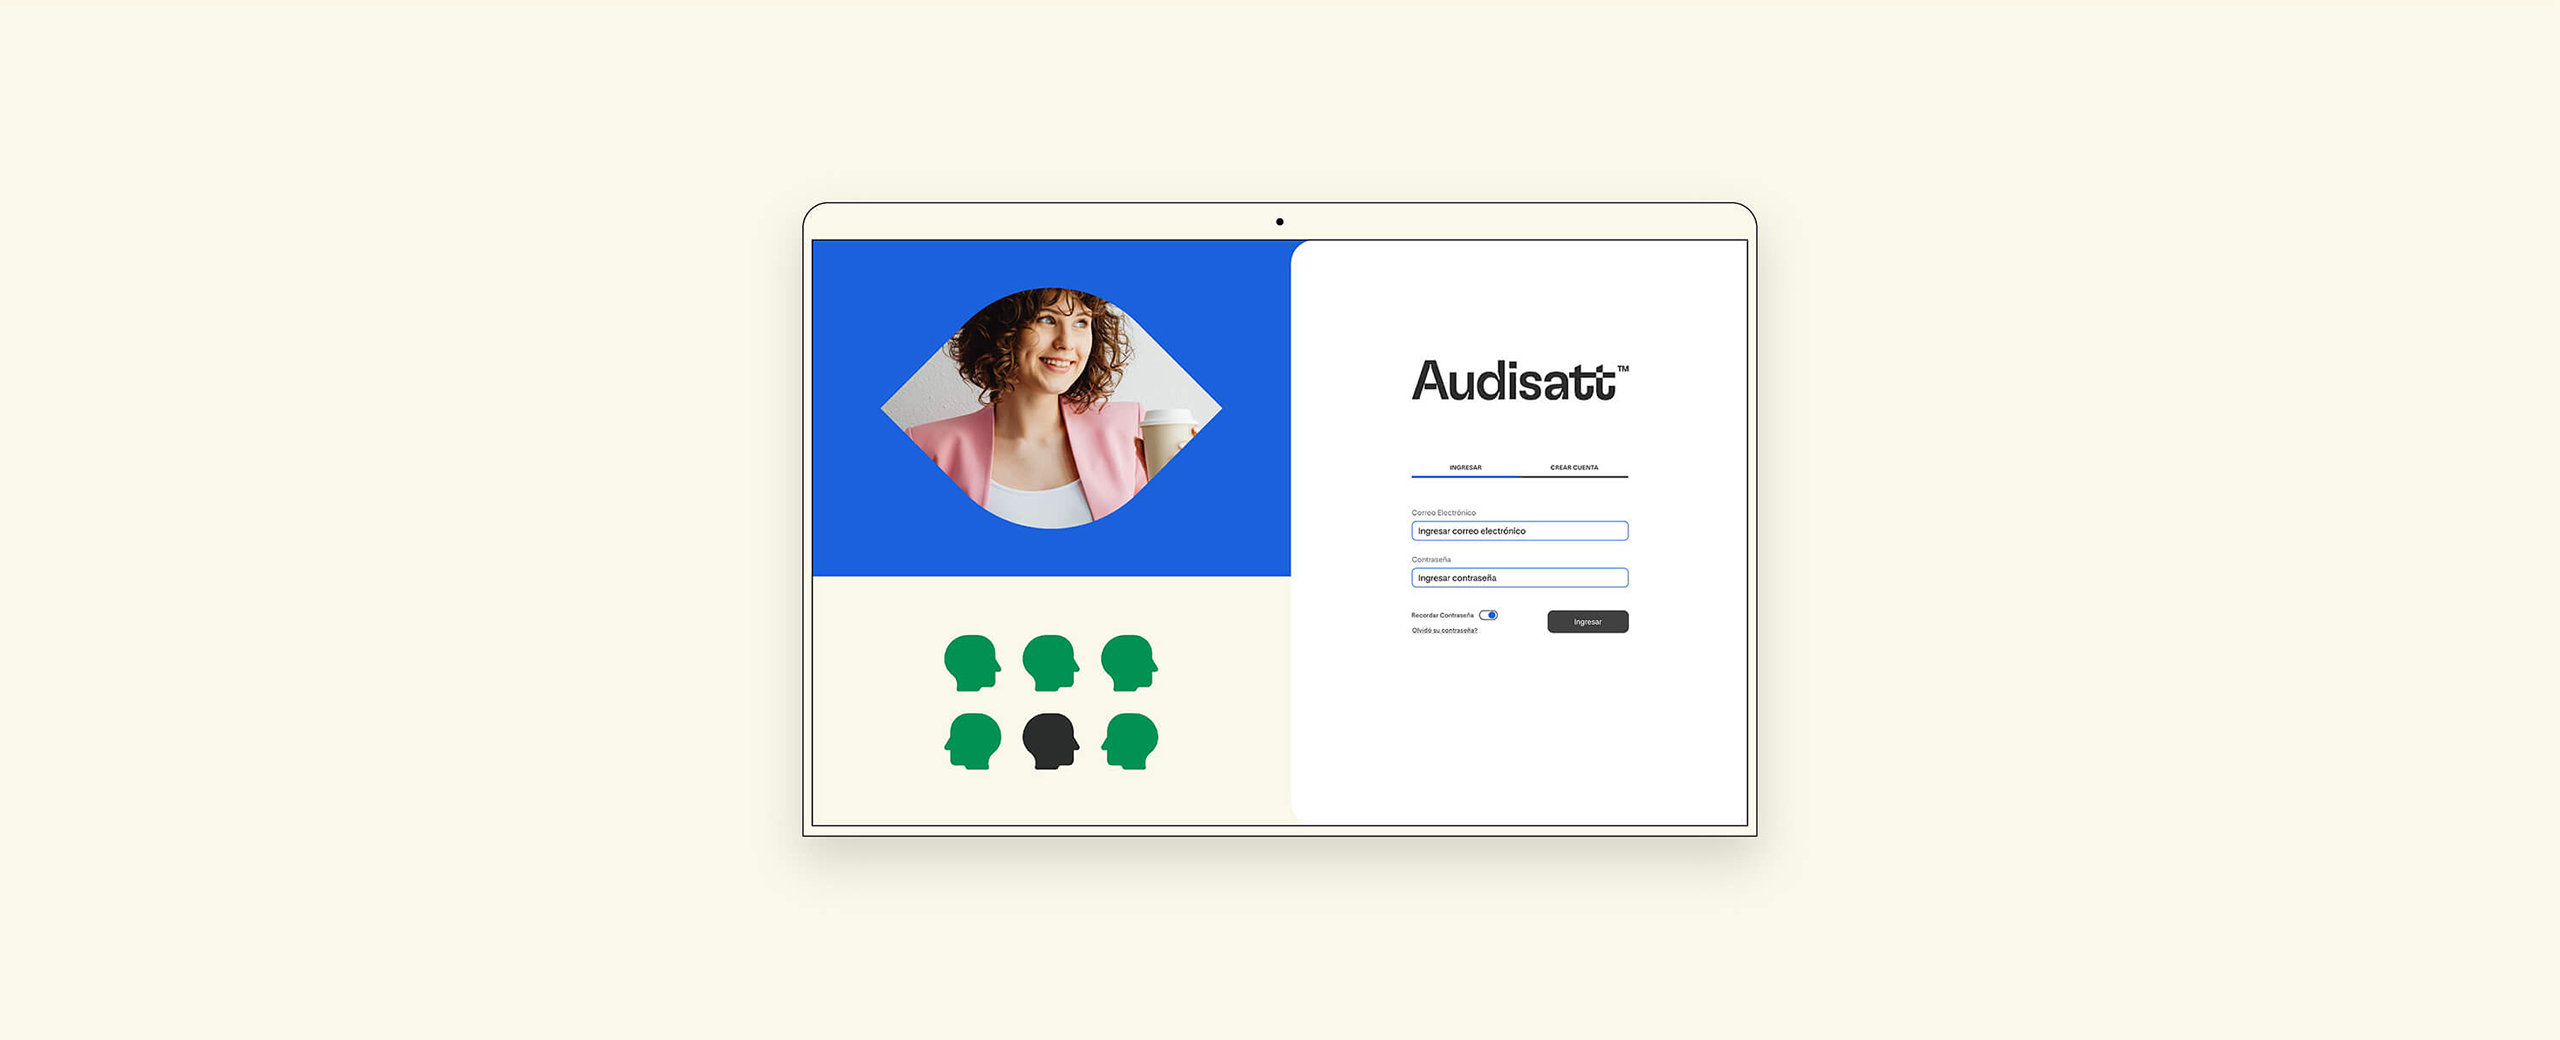 Audisatt: UX and UI Design and Implementation by Phidev